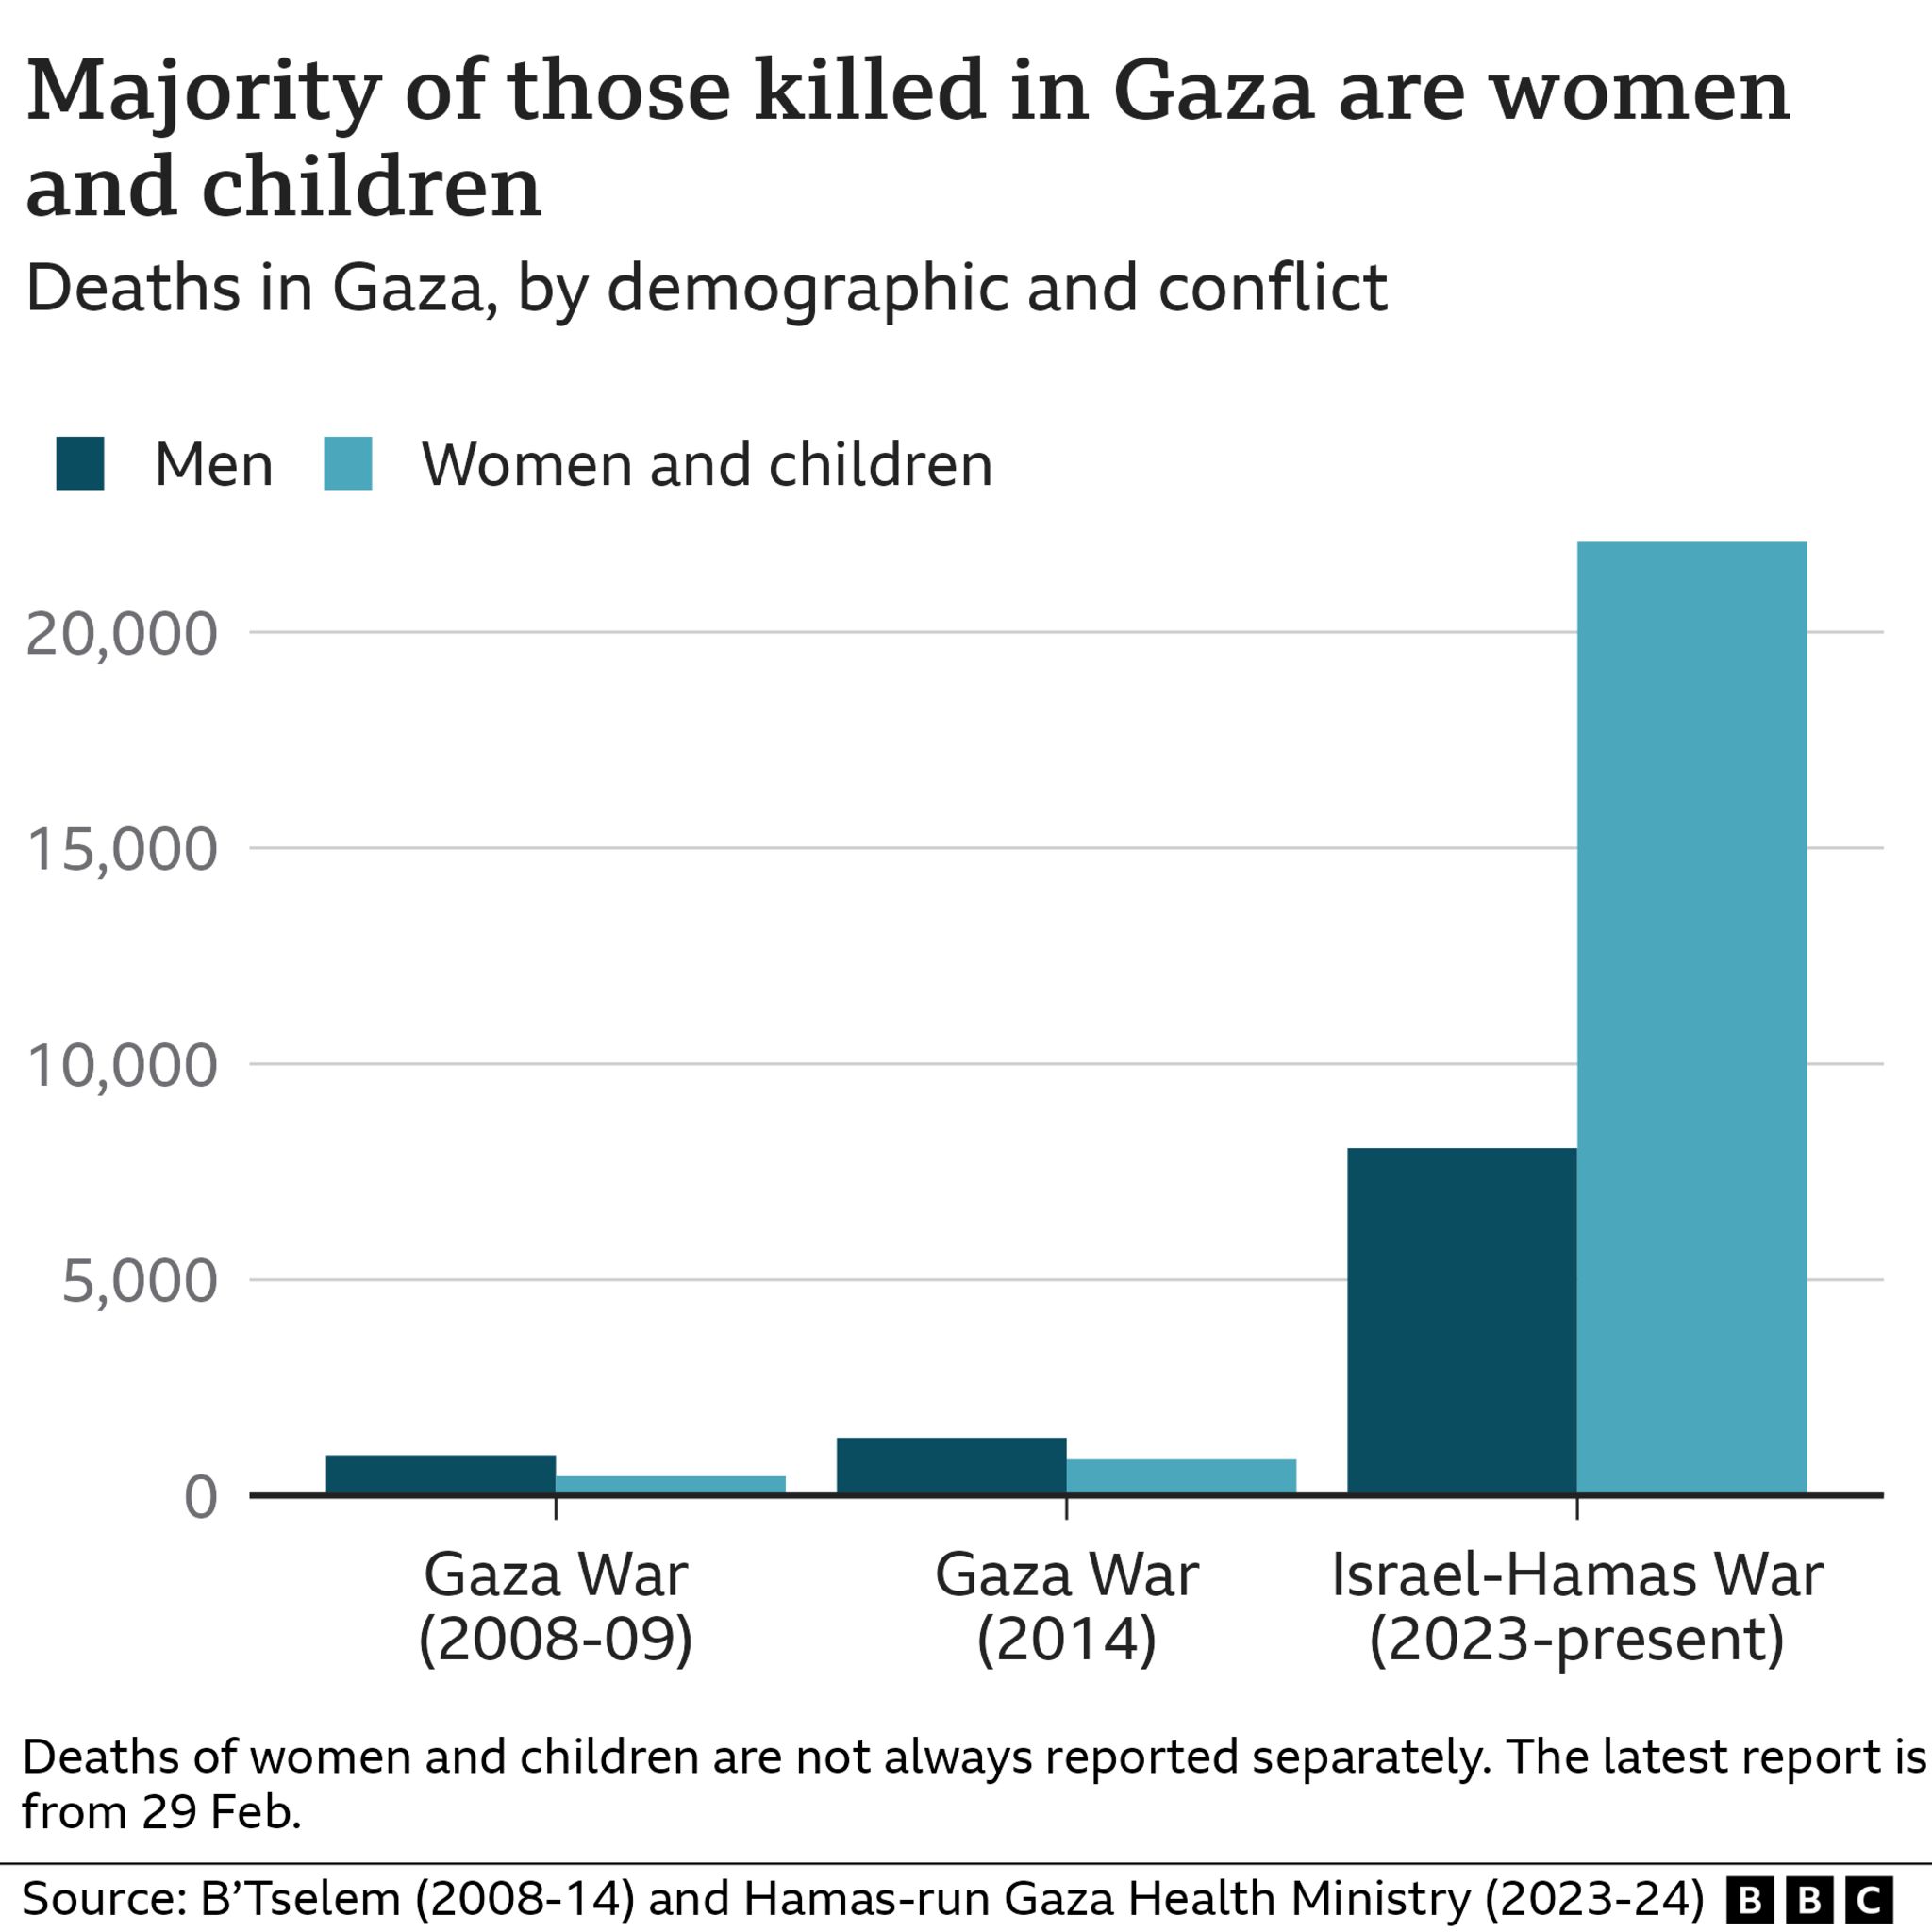 A graph showing how the porportion of women and children killed in this conflict is far greater than in previous conflicts betwen Israel and Gaza in 2008 and 2014